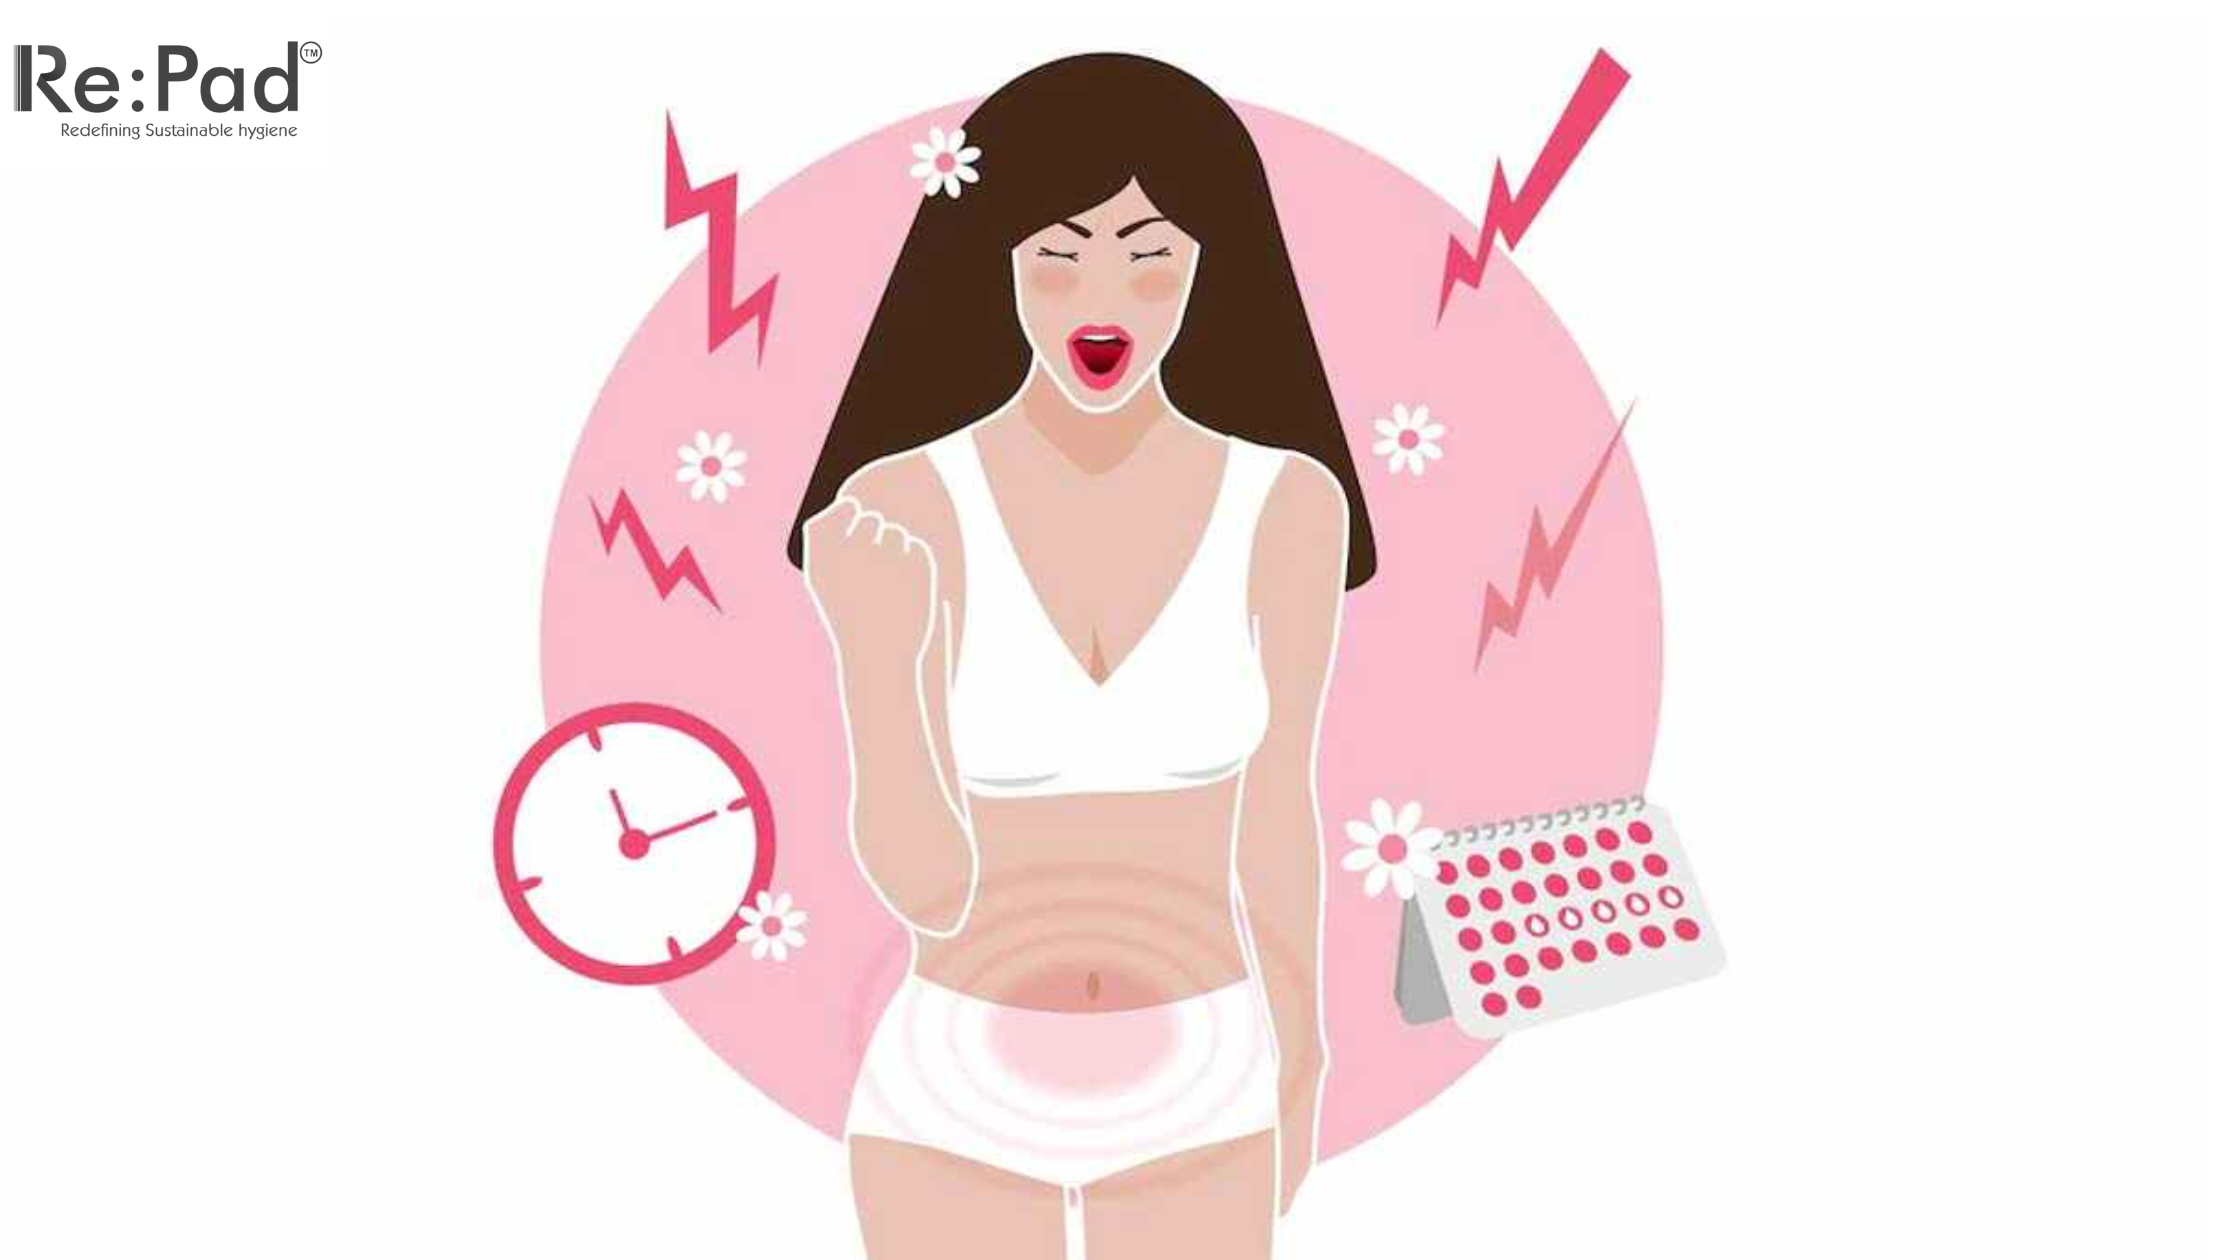 Blushing Shimmers: How to treat and prevent rashes due to periods